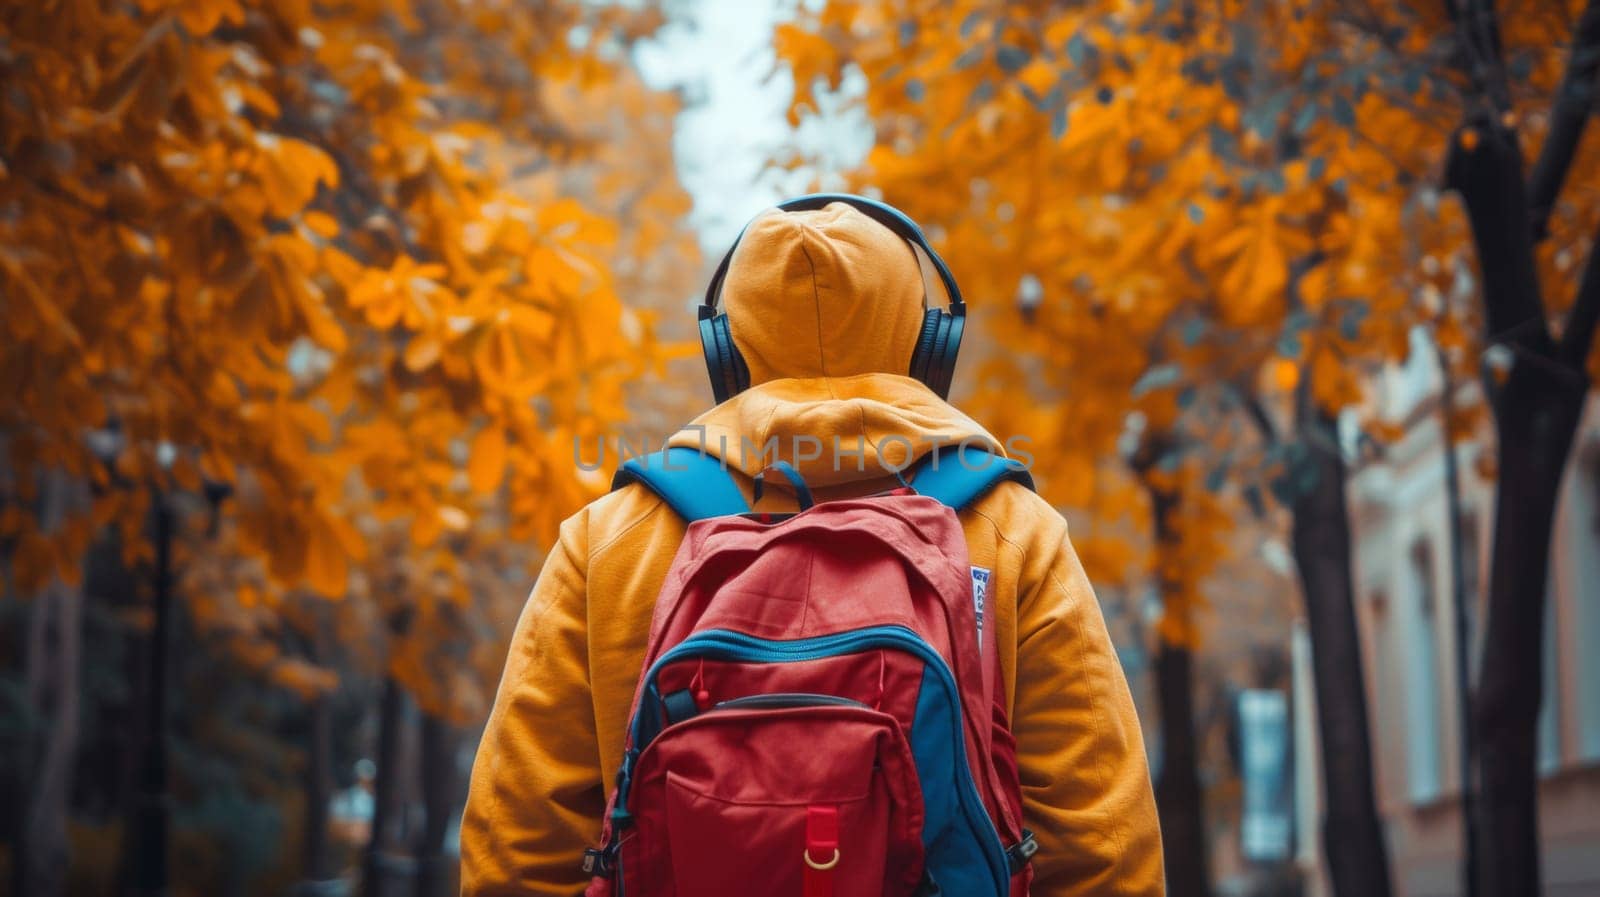 A person wearing a backpack and headphones walking down the street, AI by starush